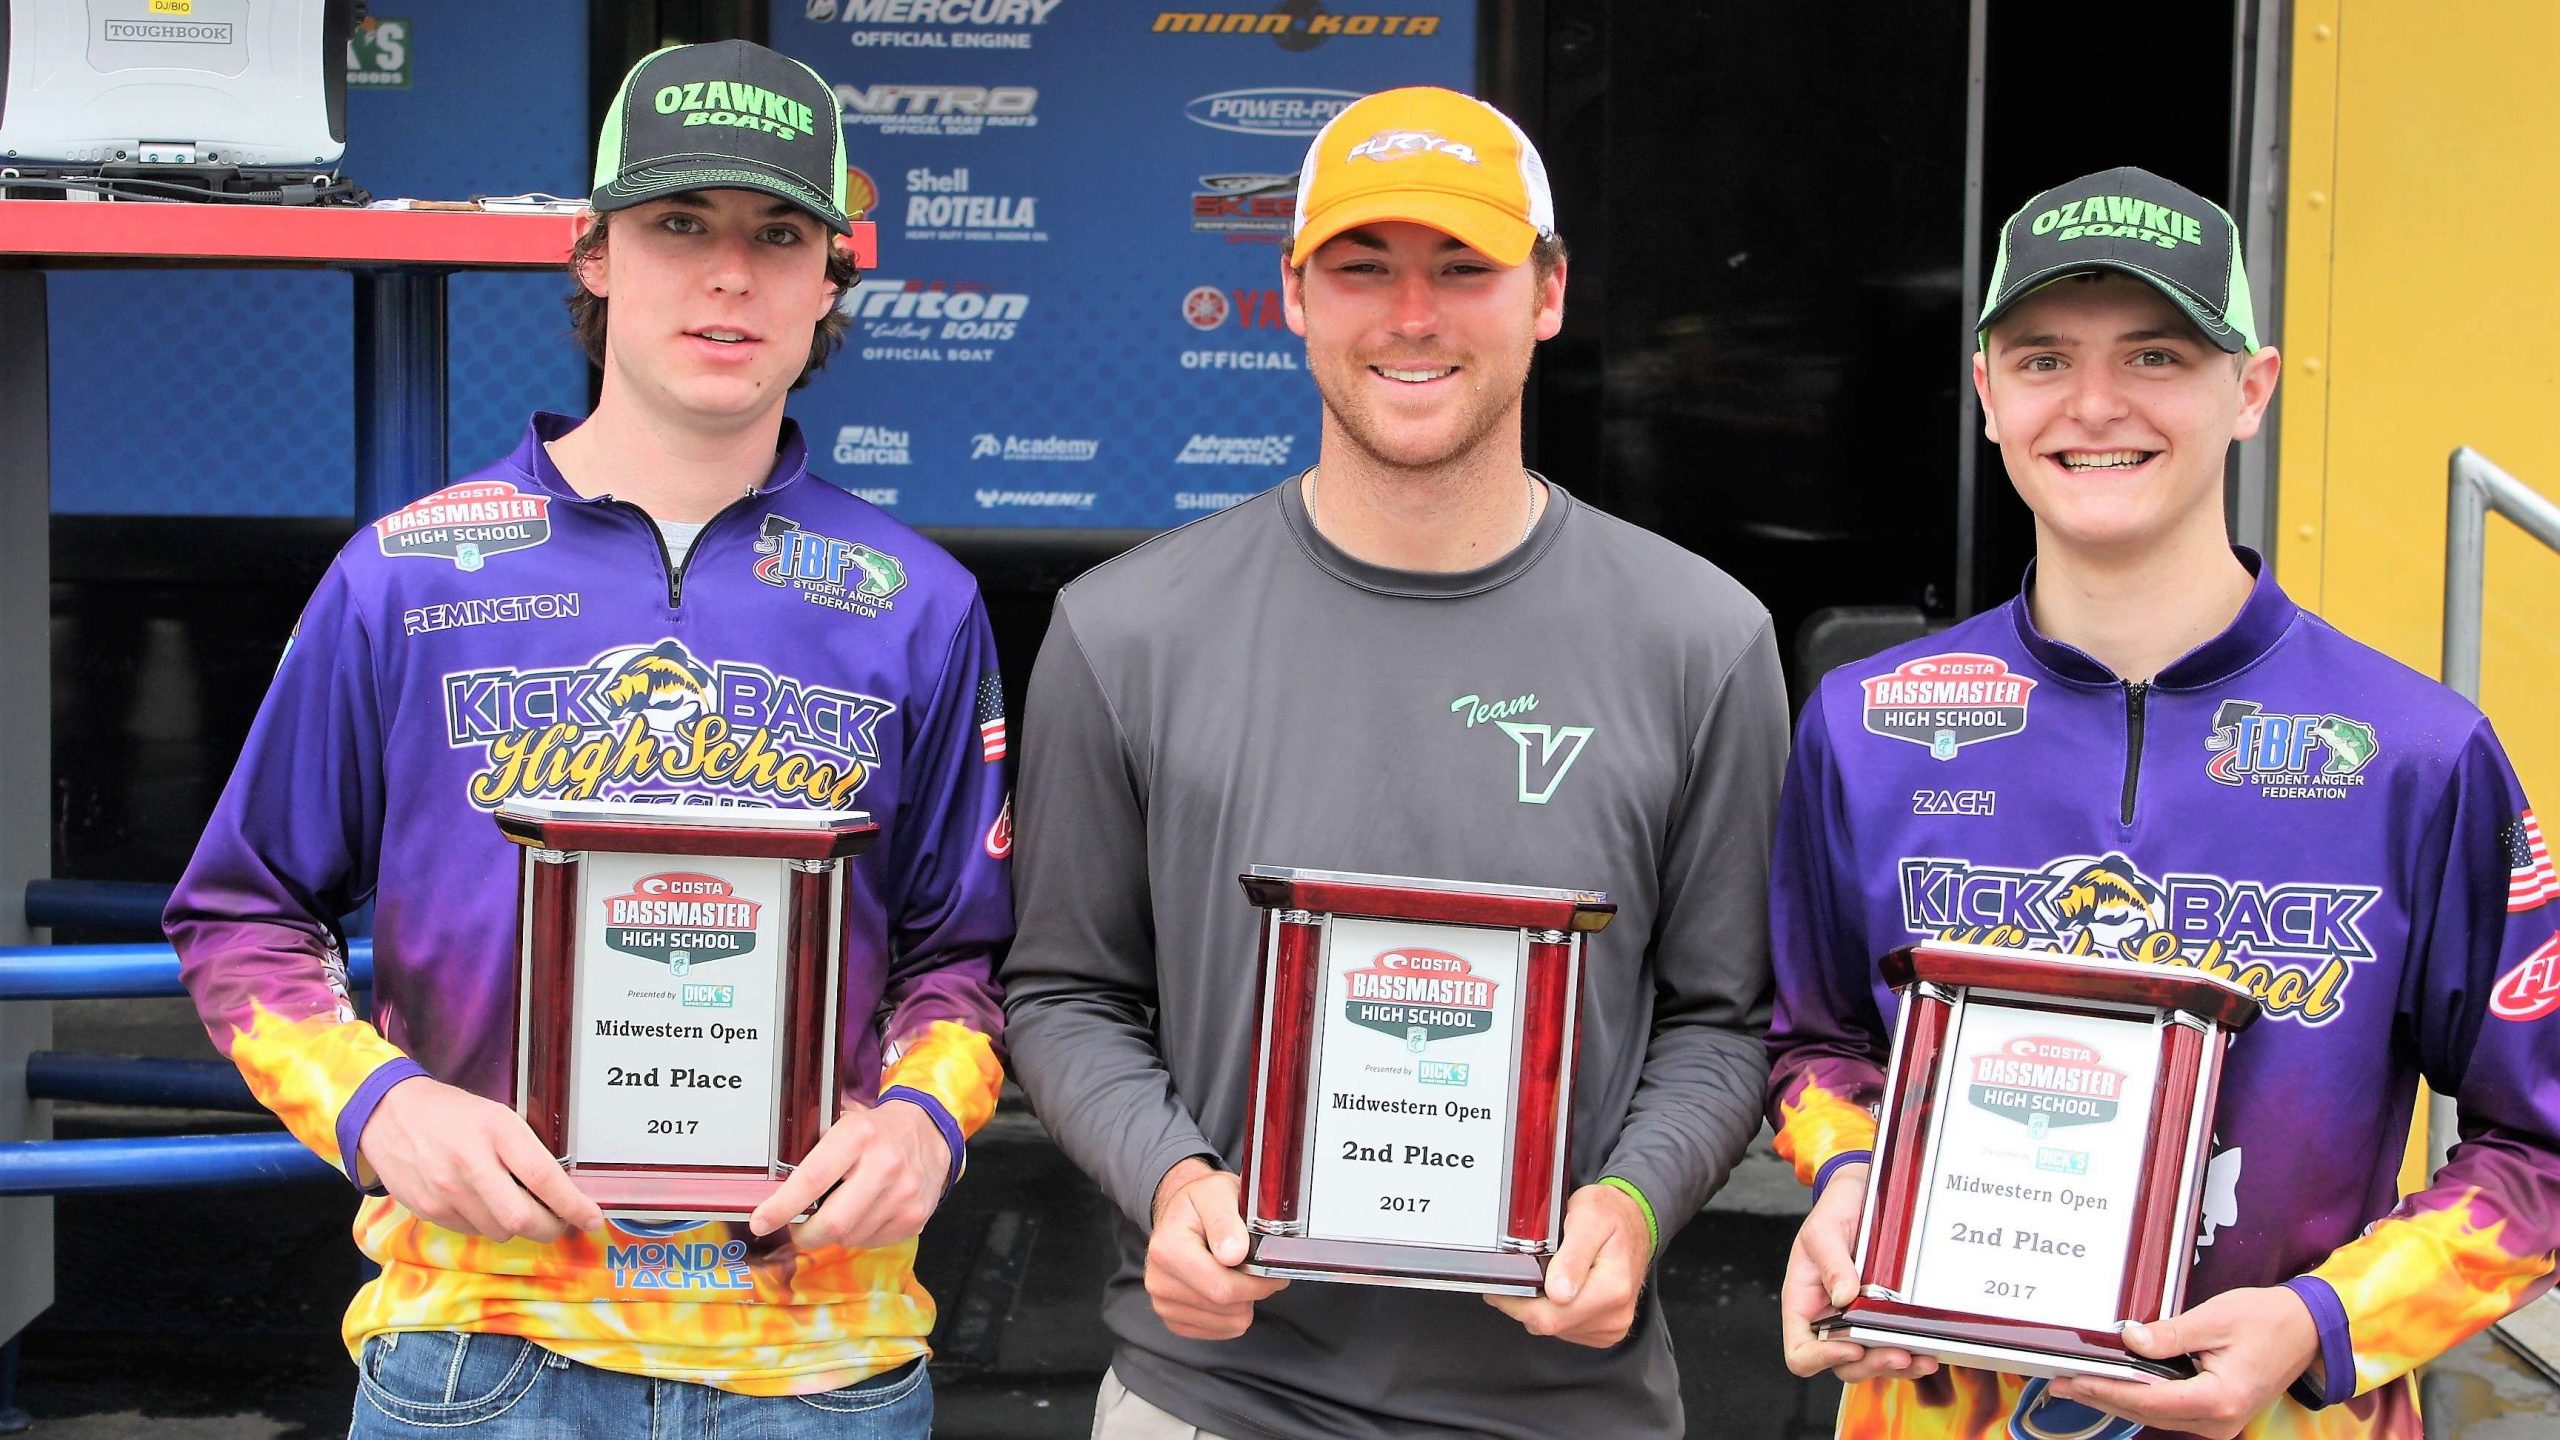 Here's the second place team, from left, Remington Wagner, boat captain Sheldon Roggee, and Zach Vielhauer. They won $500 for the Kickback High School Bass Fishing team back in Kansas.